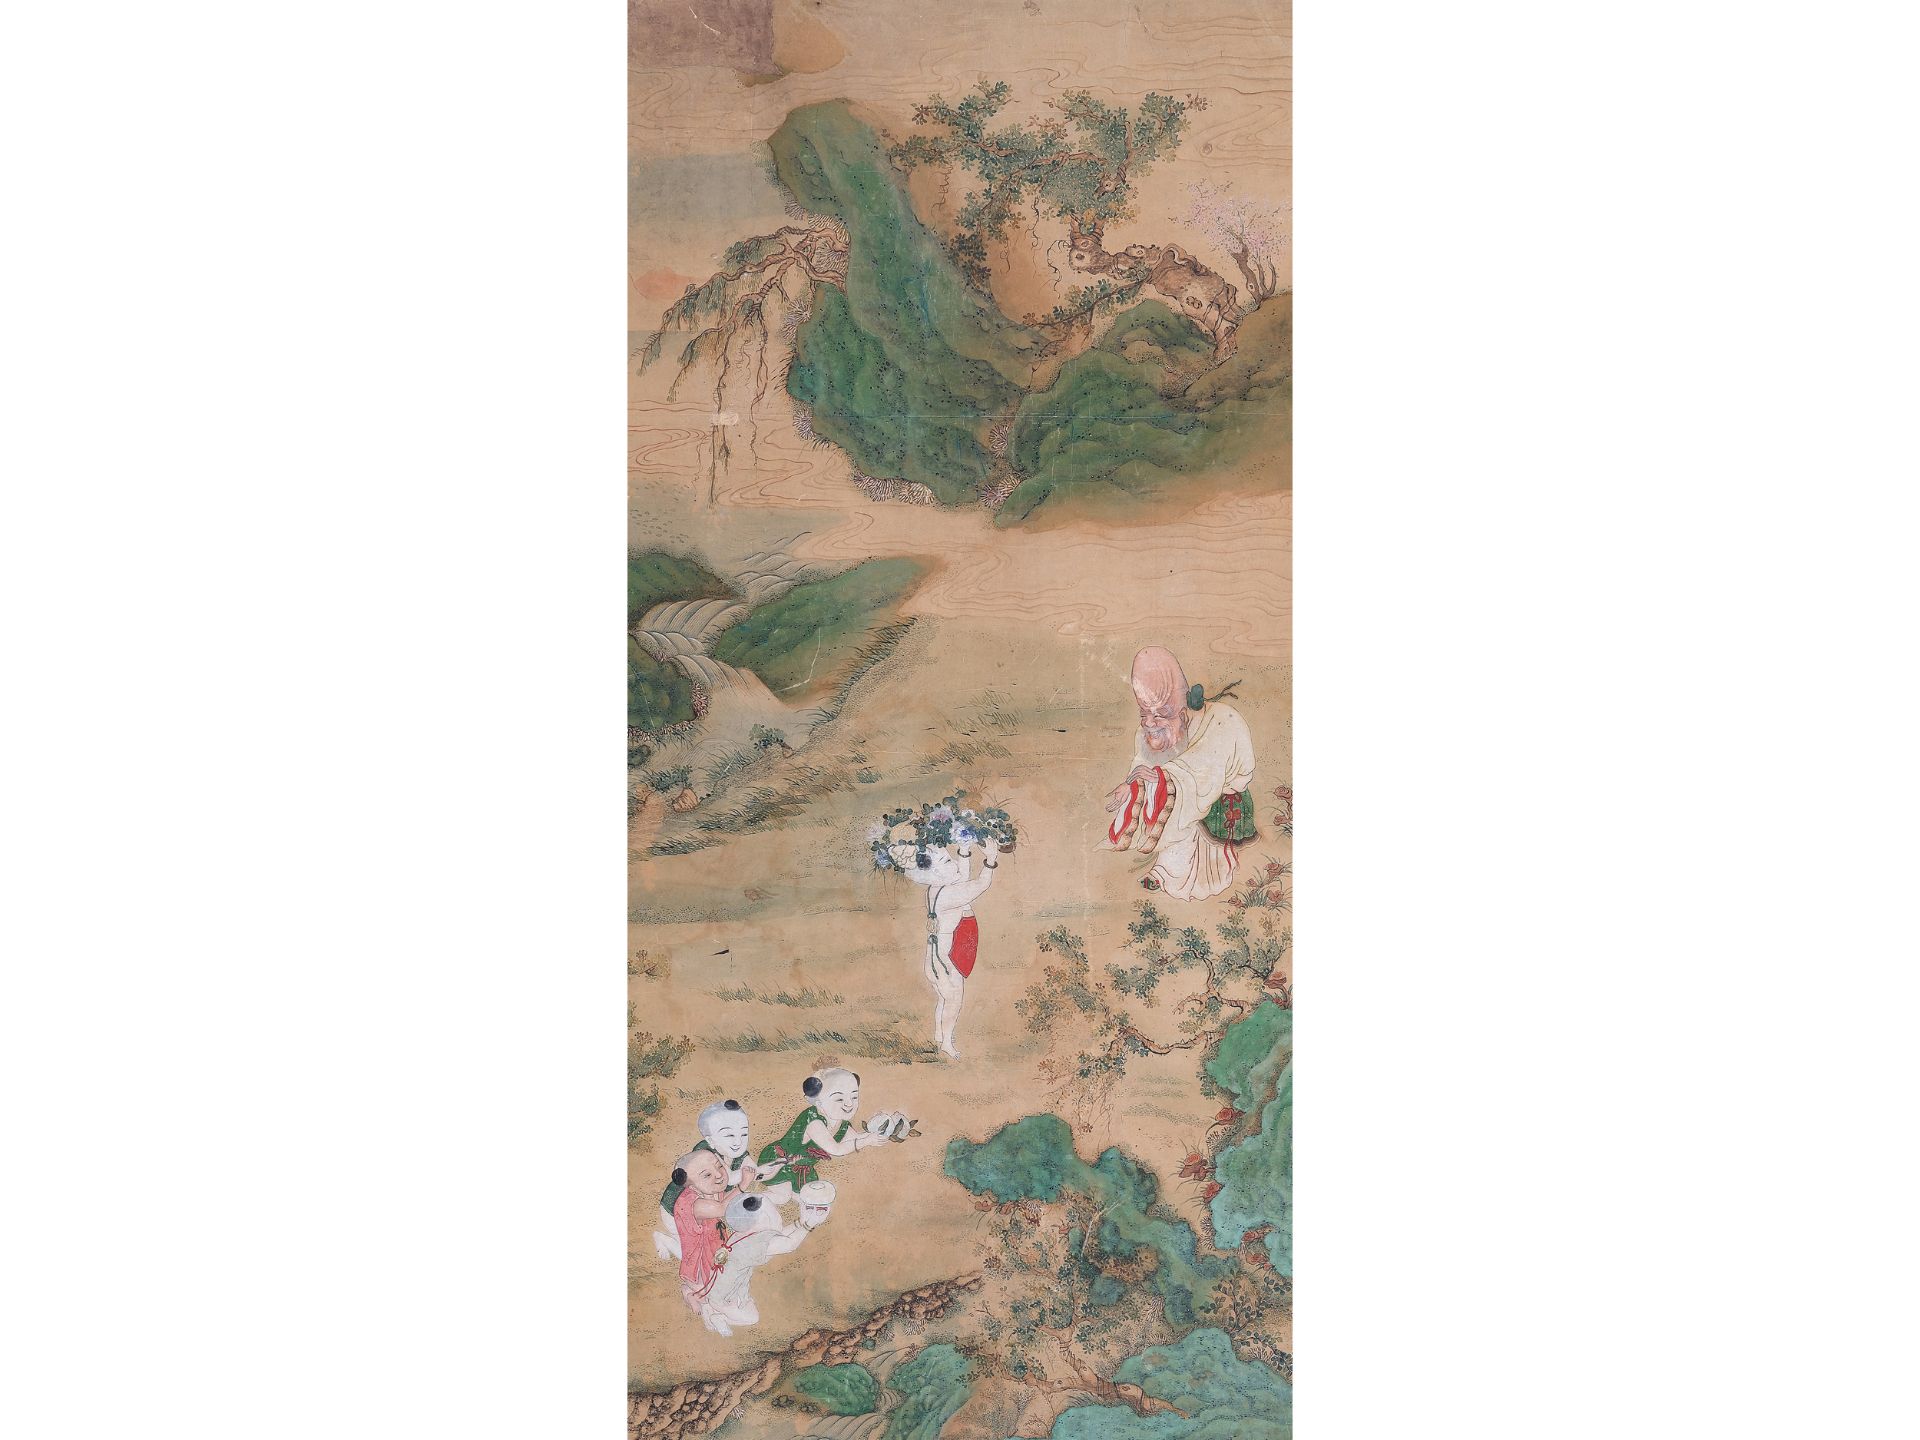 China, 
19th century or earlier, 
Watercolour on paper